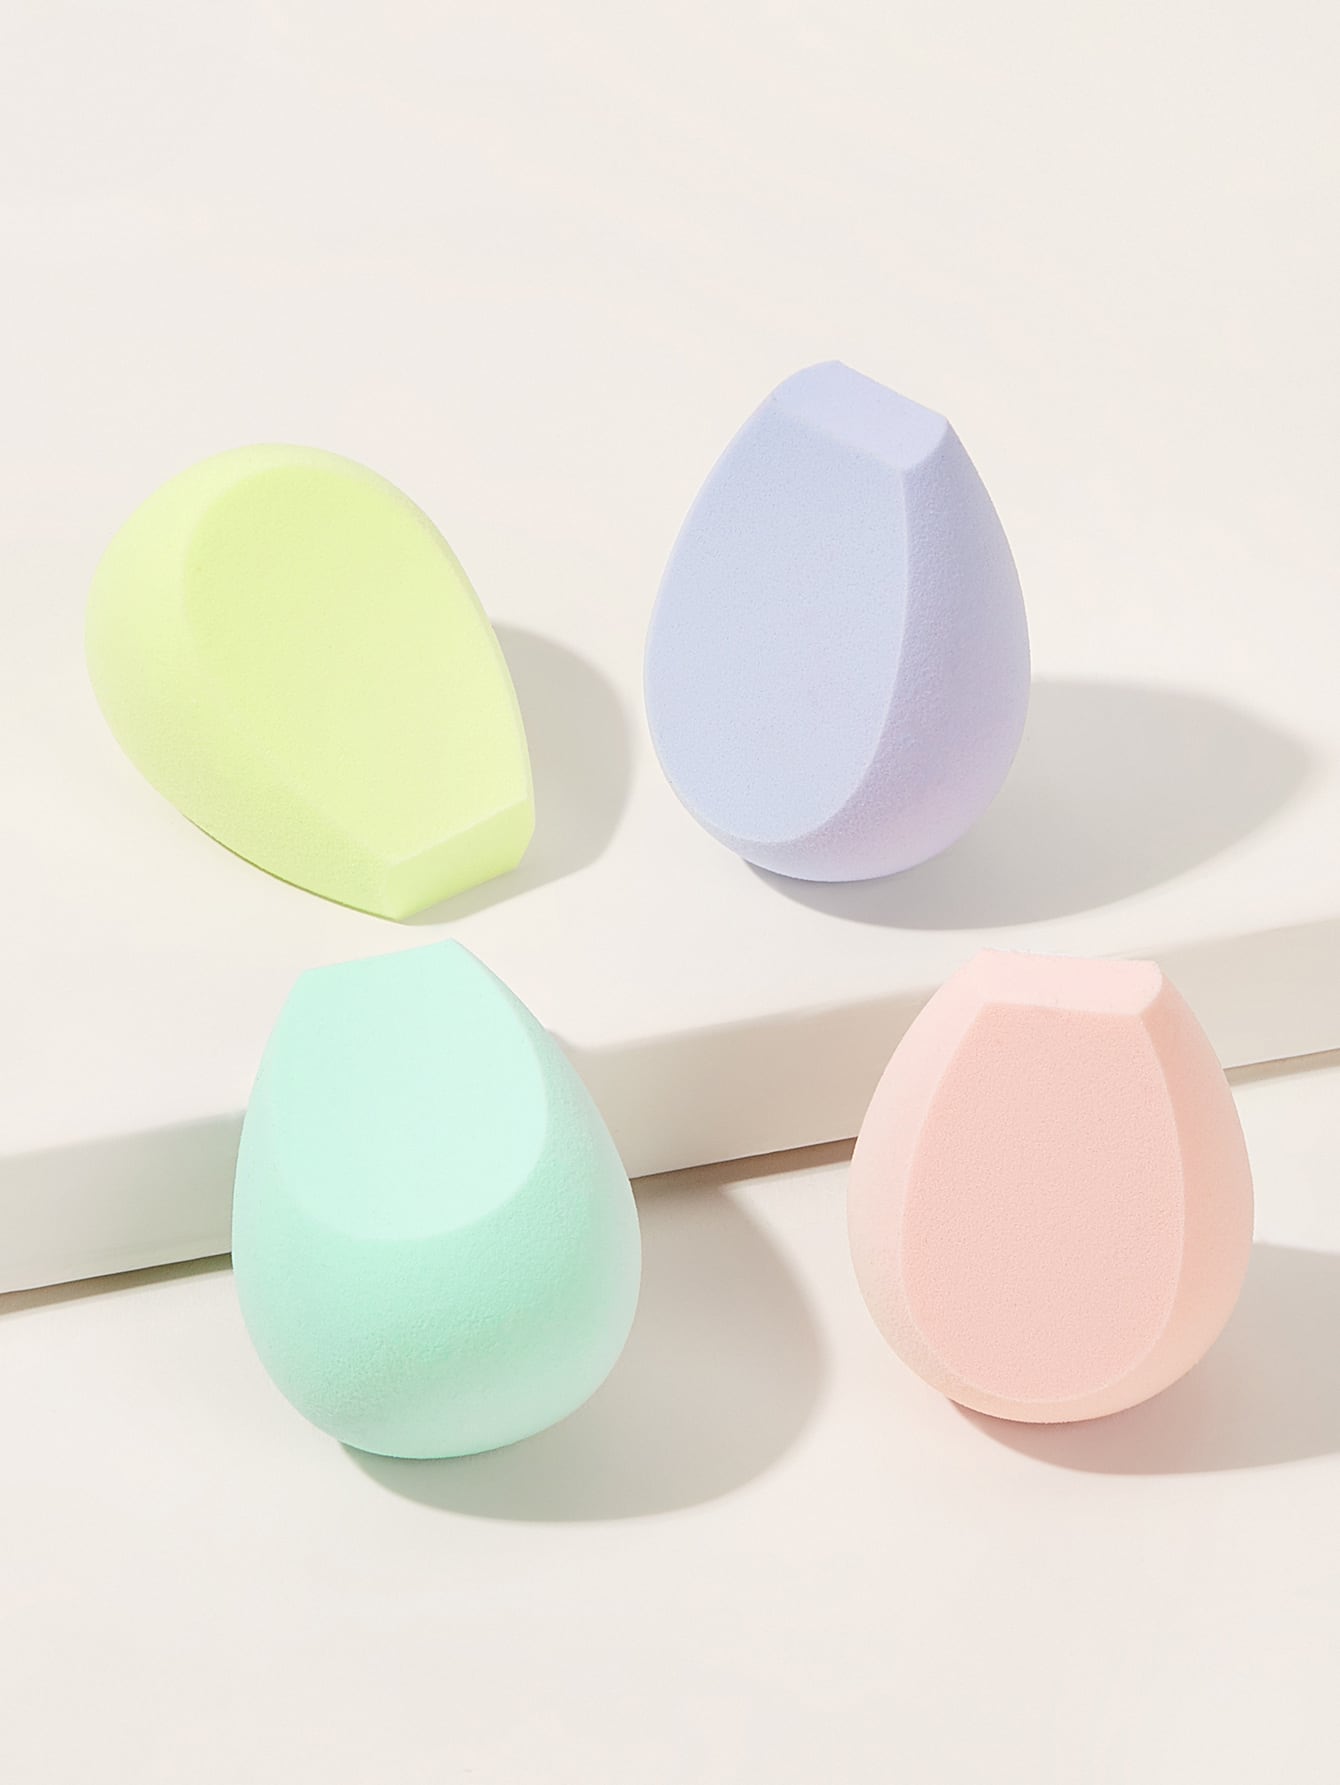 Single pudding beauty egg, color random delivery, facial makeup sponge, breathable and easy to carry, dry and wet makeup sponge for facial mixed lotion, preferred beauty tool, free of liquid, cream and powder